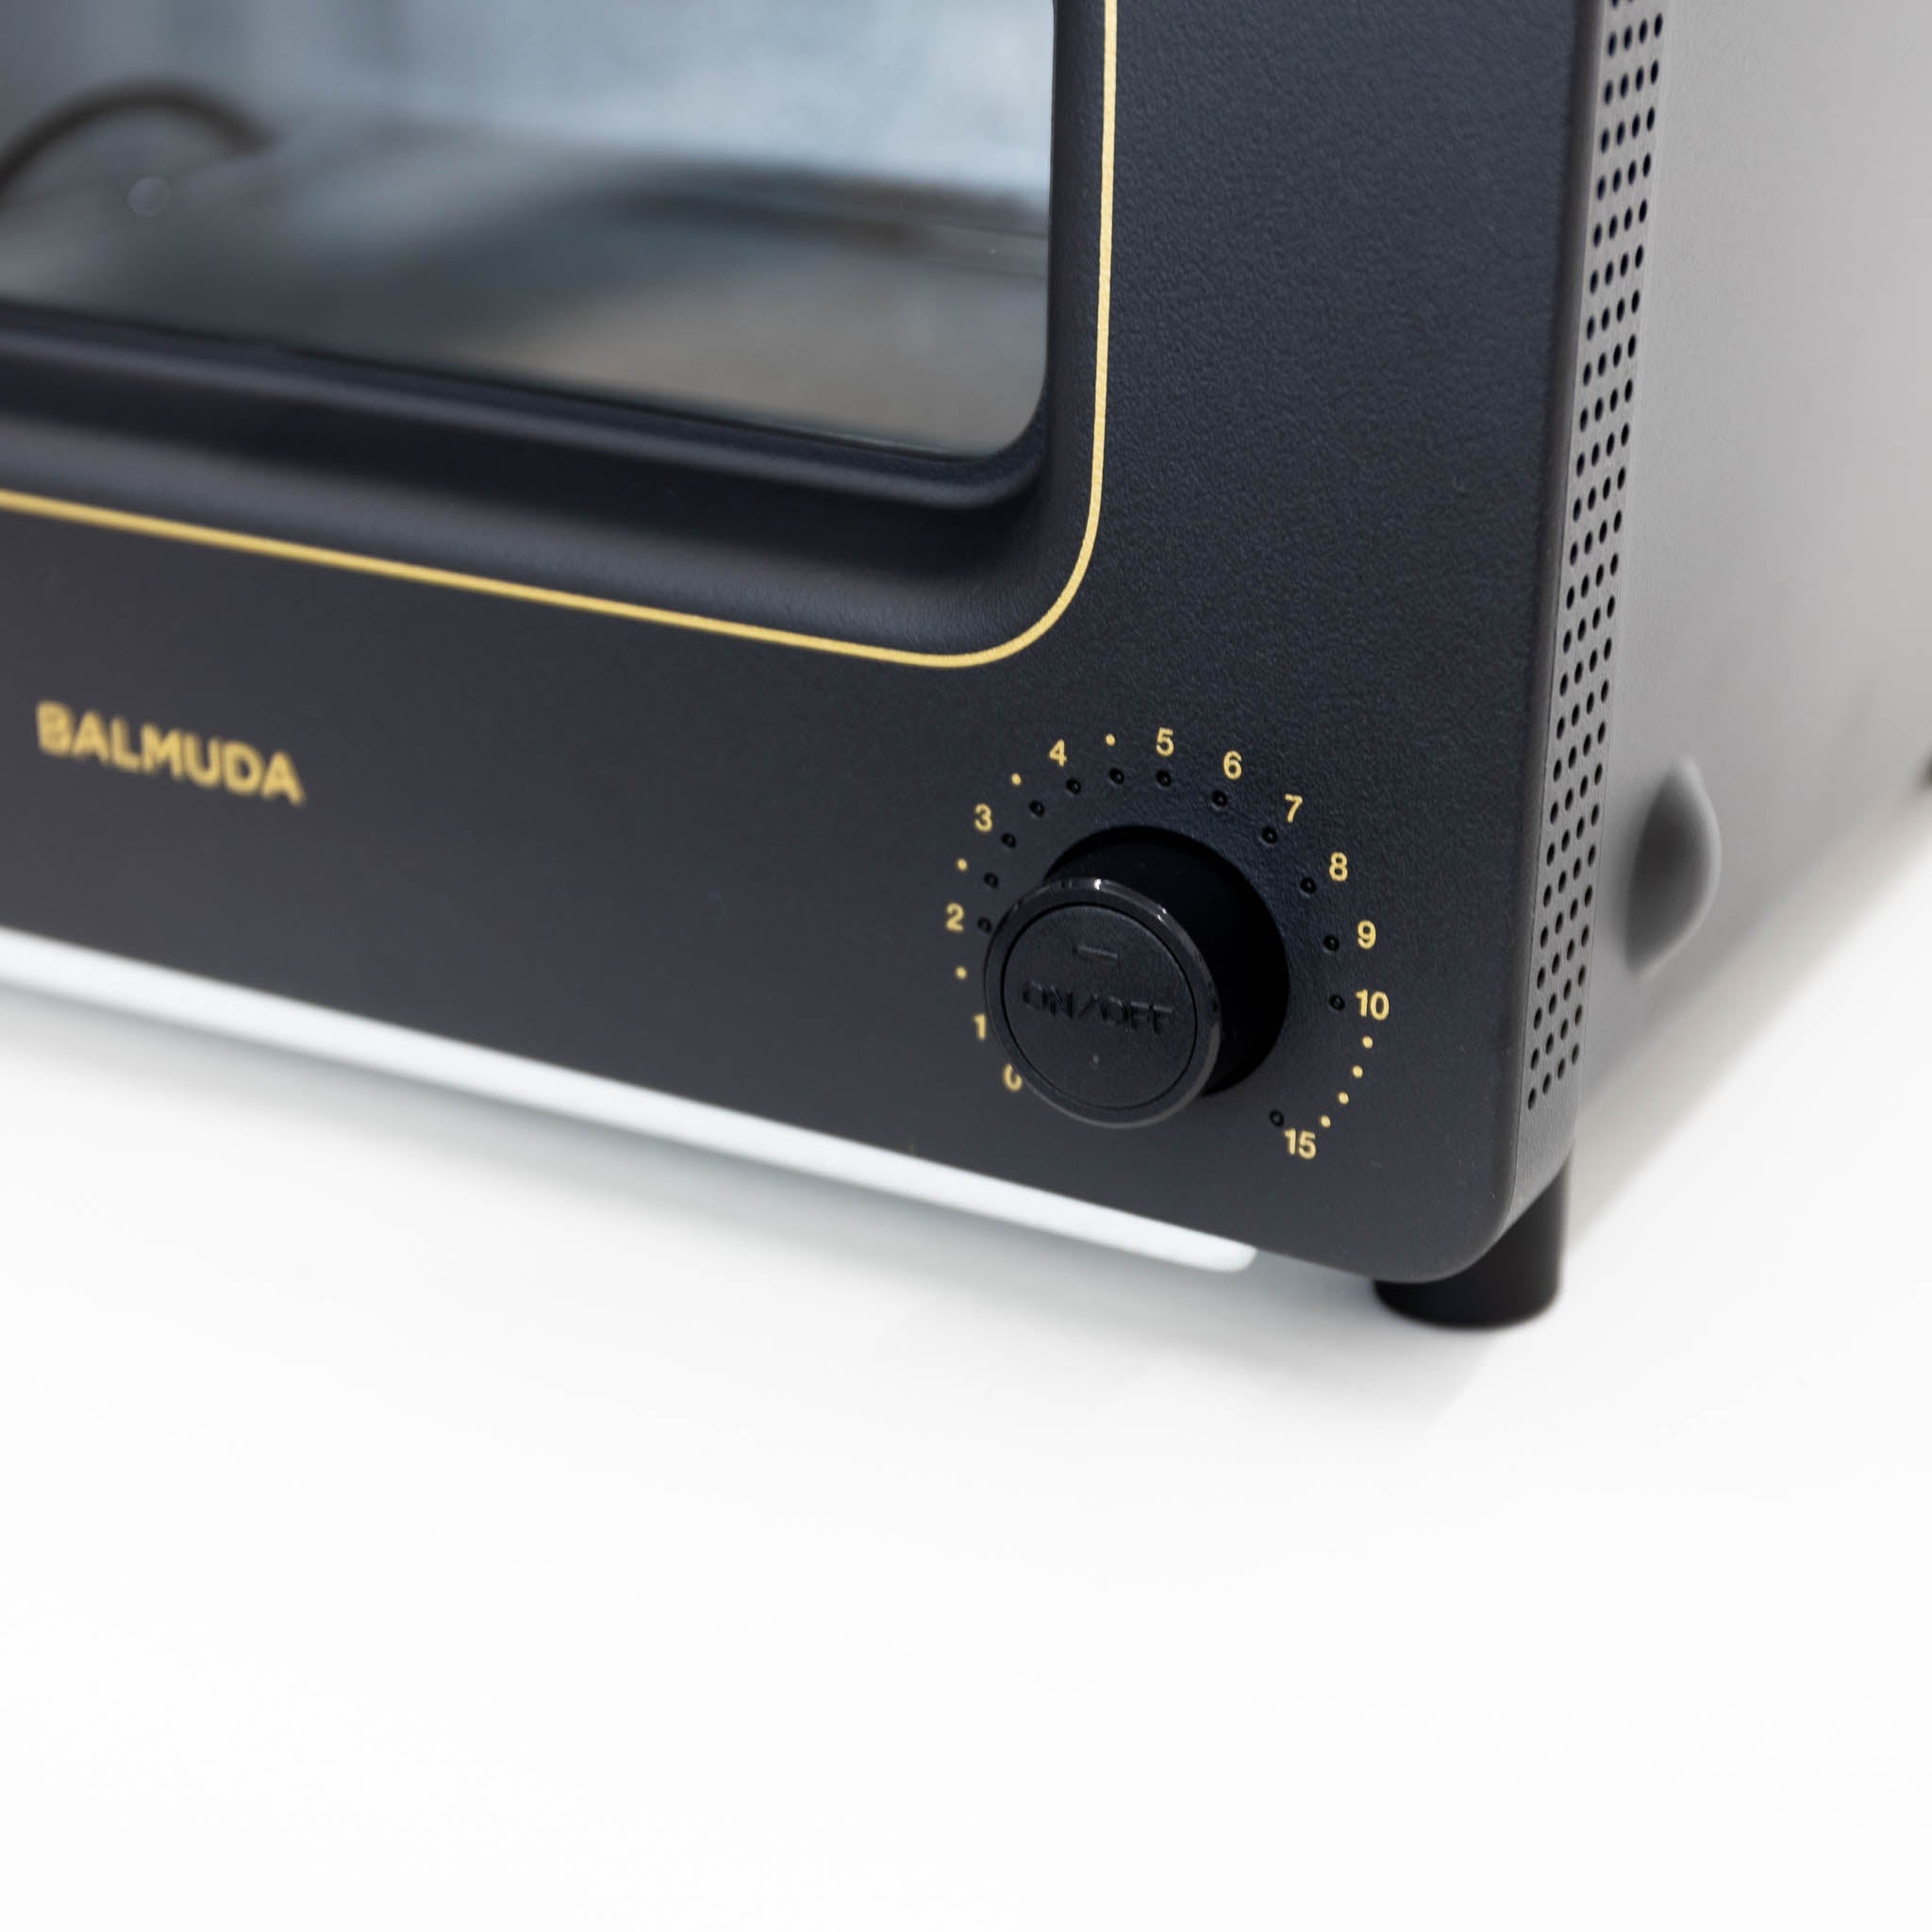 This High-Tech Japanese Toaster Oven Is Now Available in the U.S.